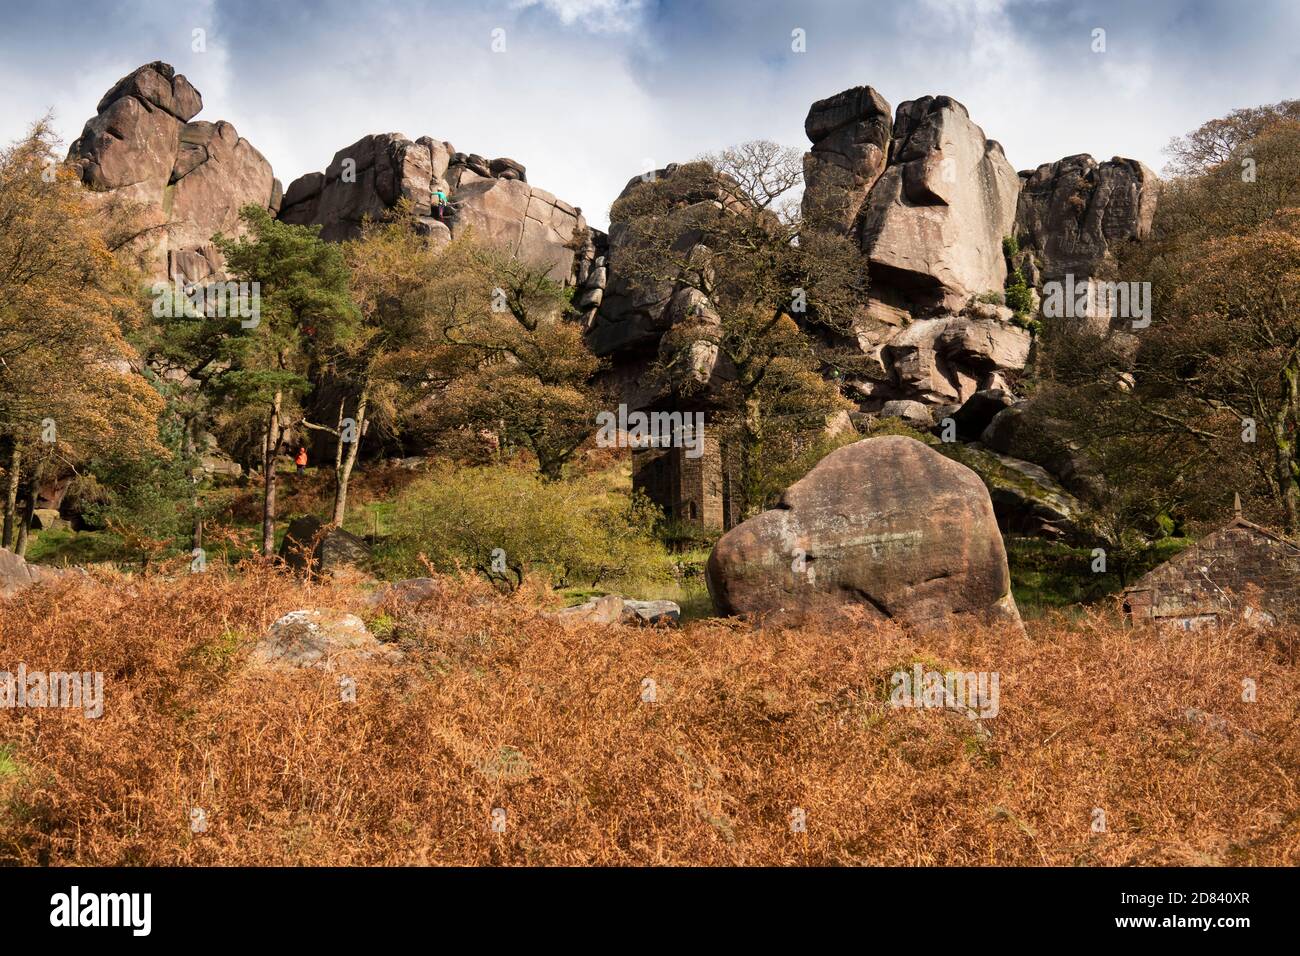 UK, England, Staffordshire, Moorlands, The Roaches, Rockhall Cottage, Don Whillans memorial hut, below rocks Stock Photo